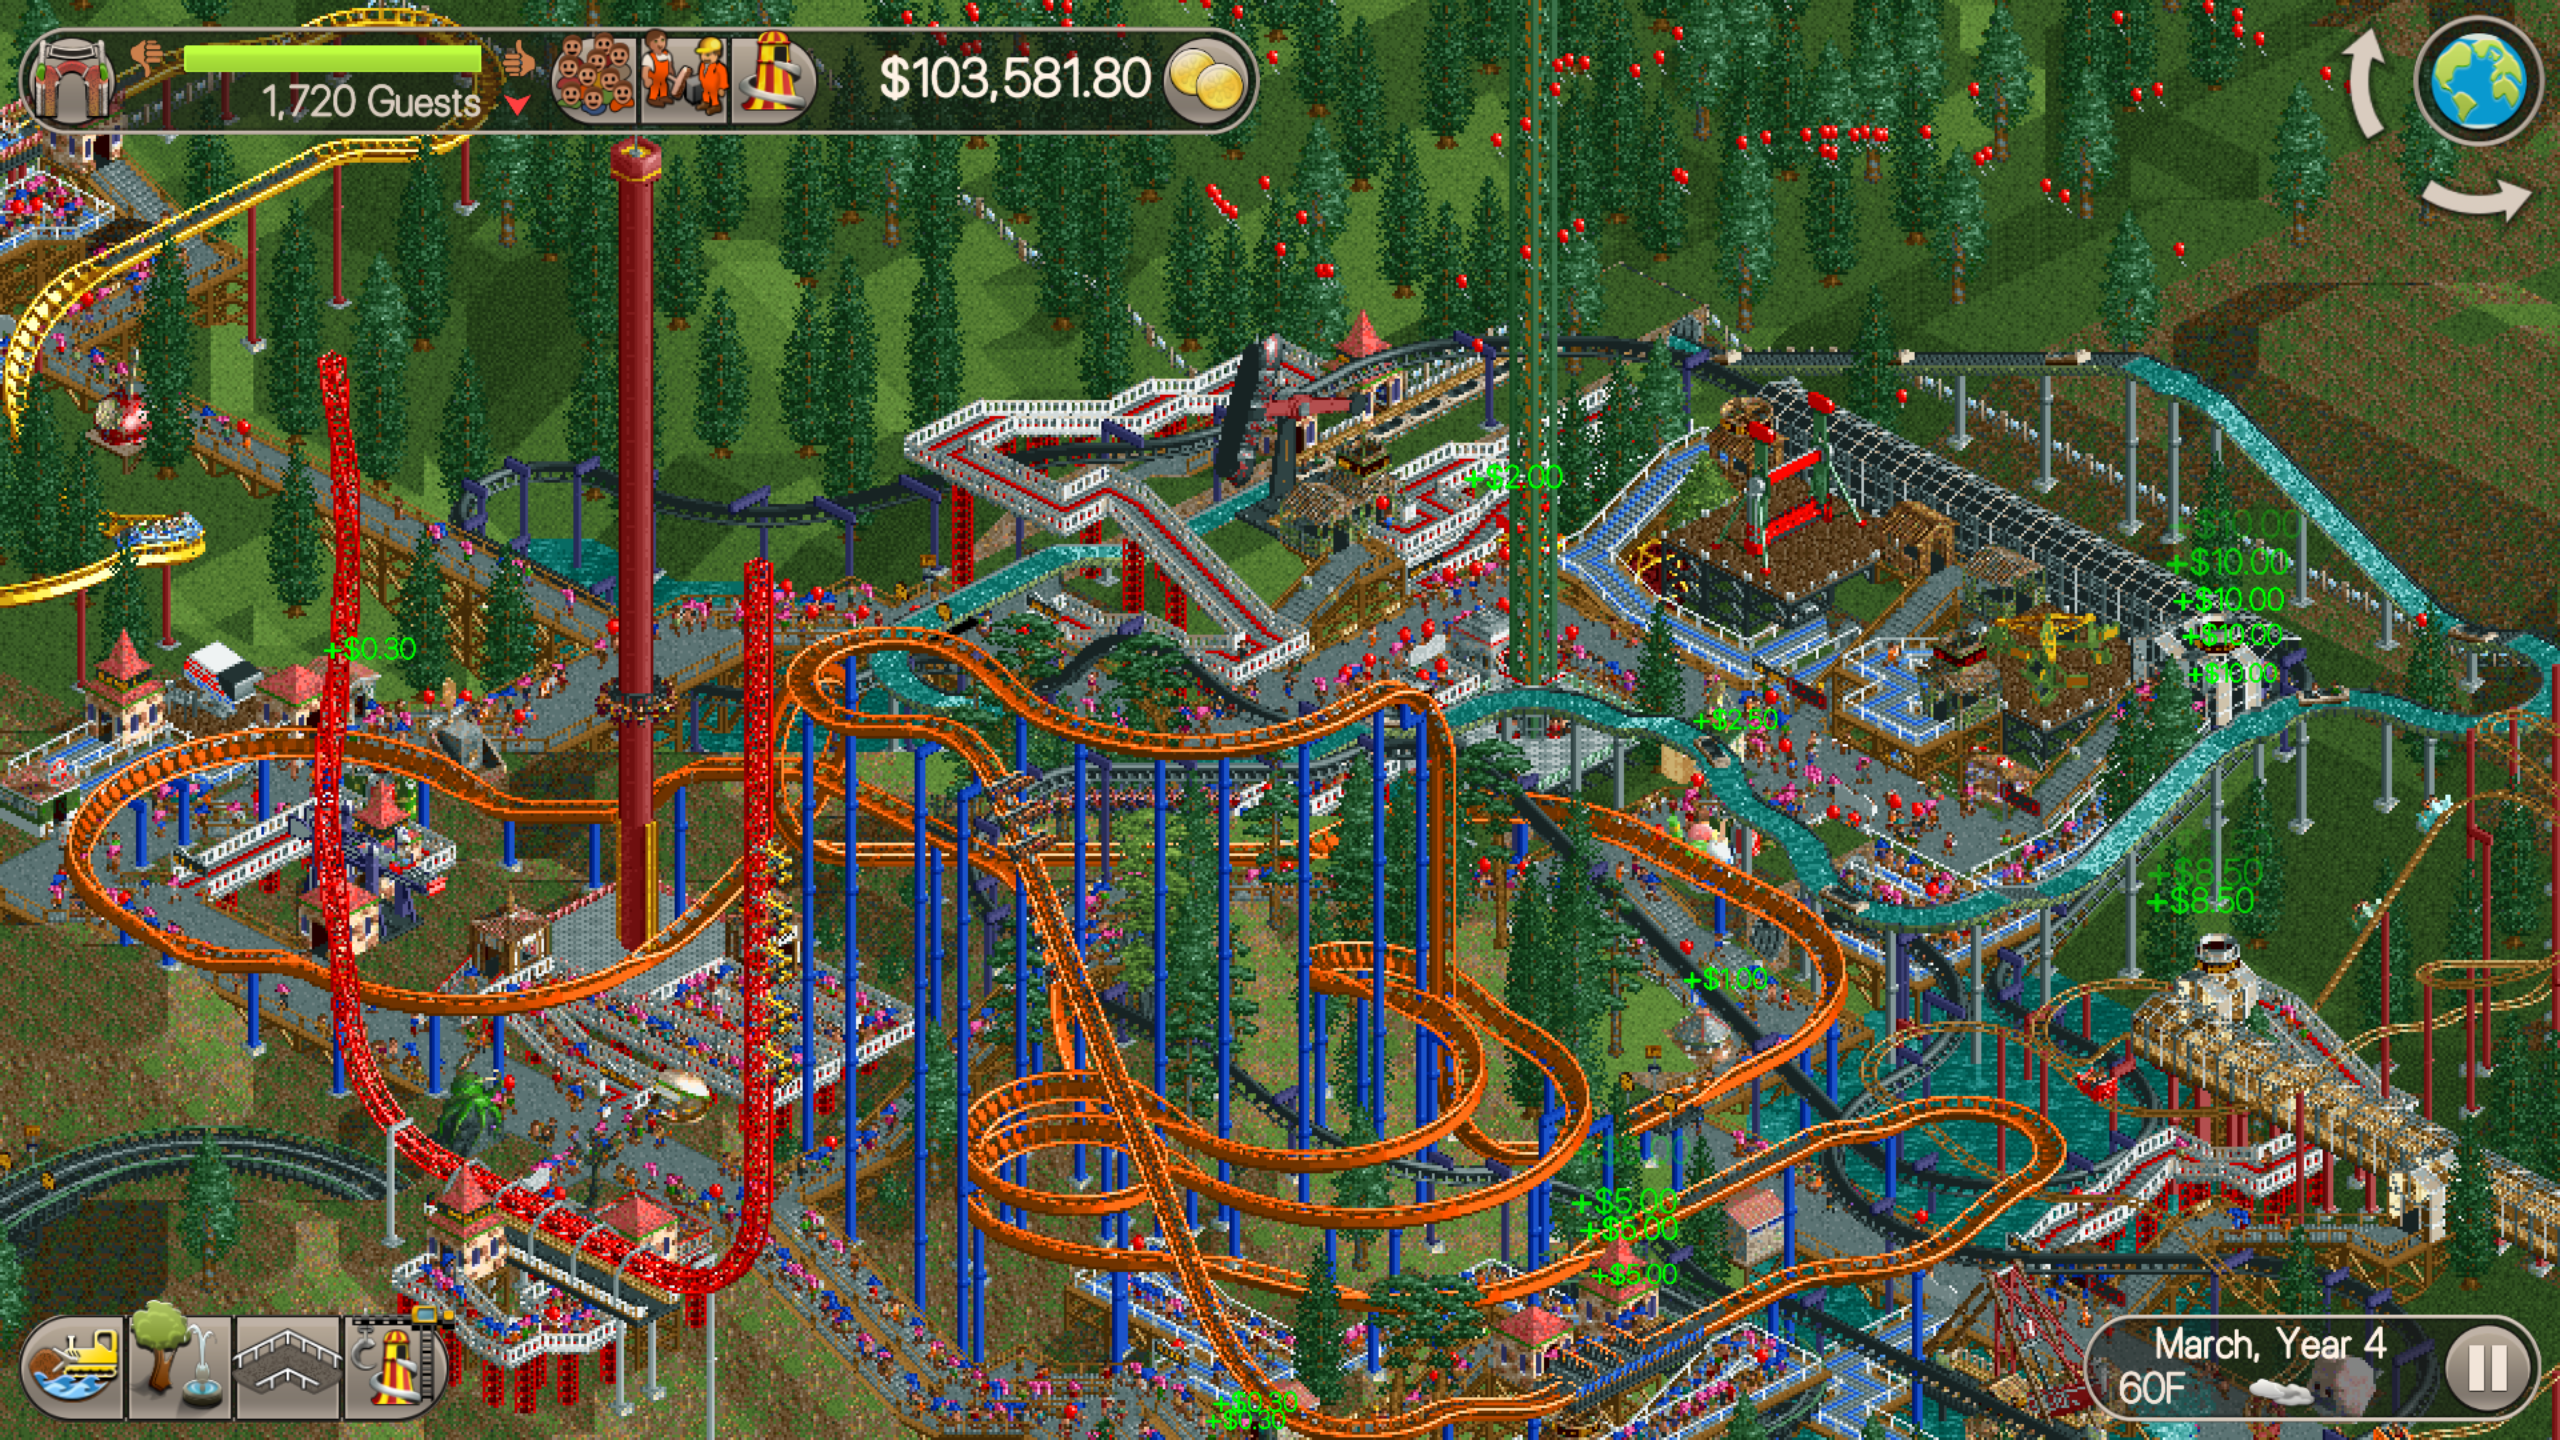 Classic] UGH! So close! Anyone got tips for guest numbers? : r/rct